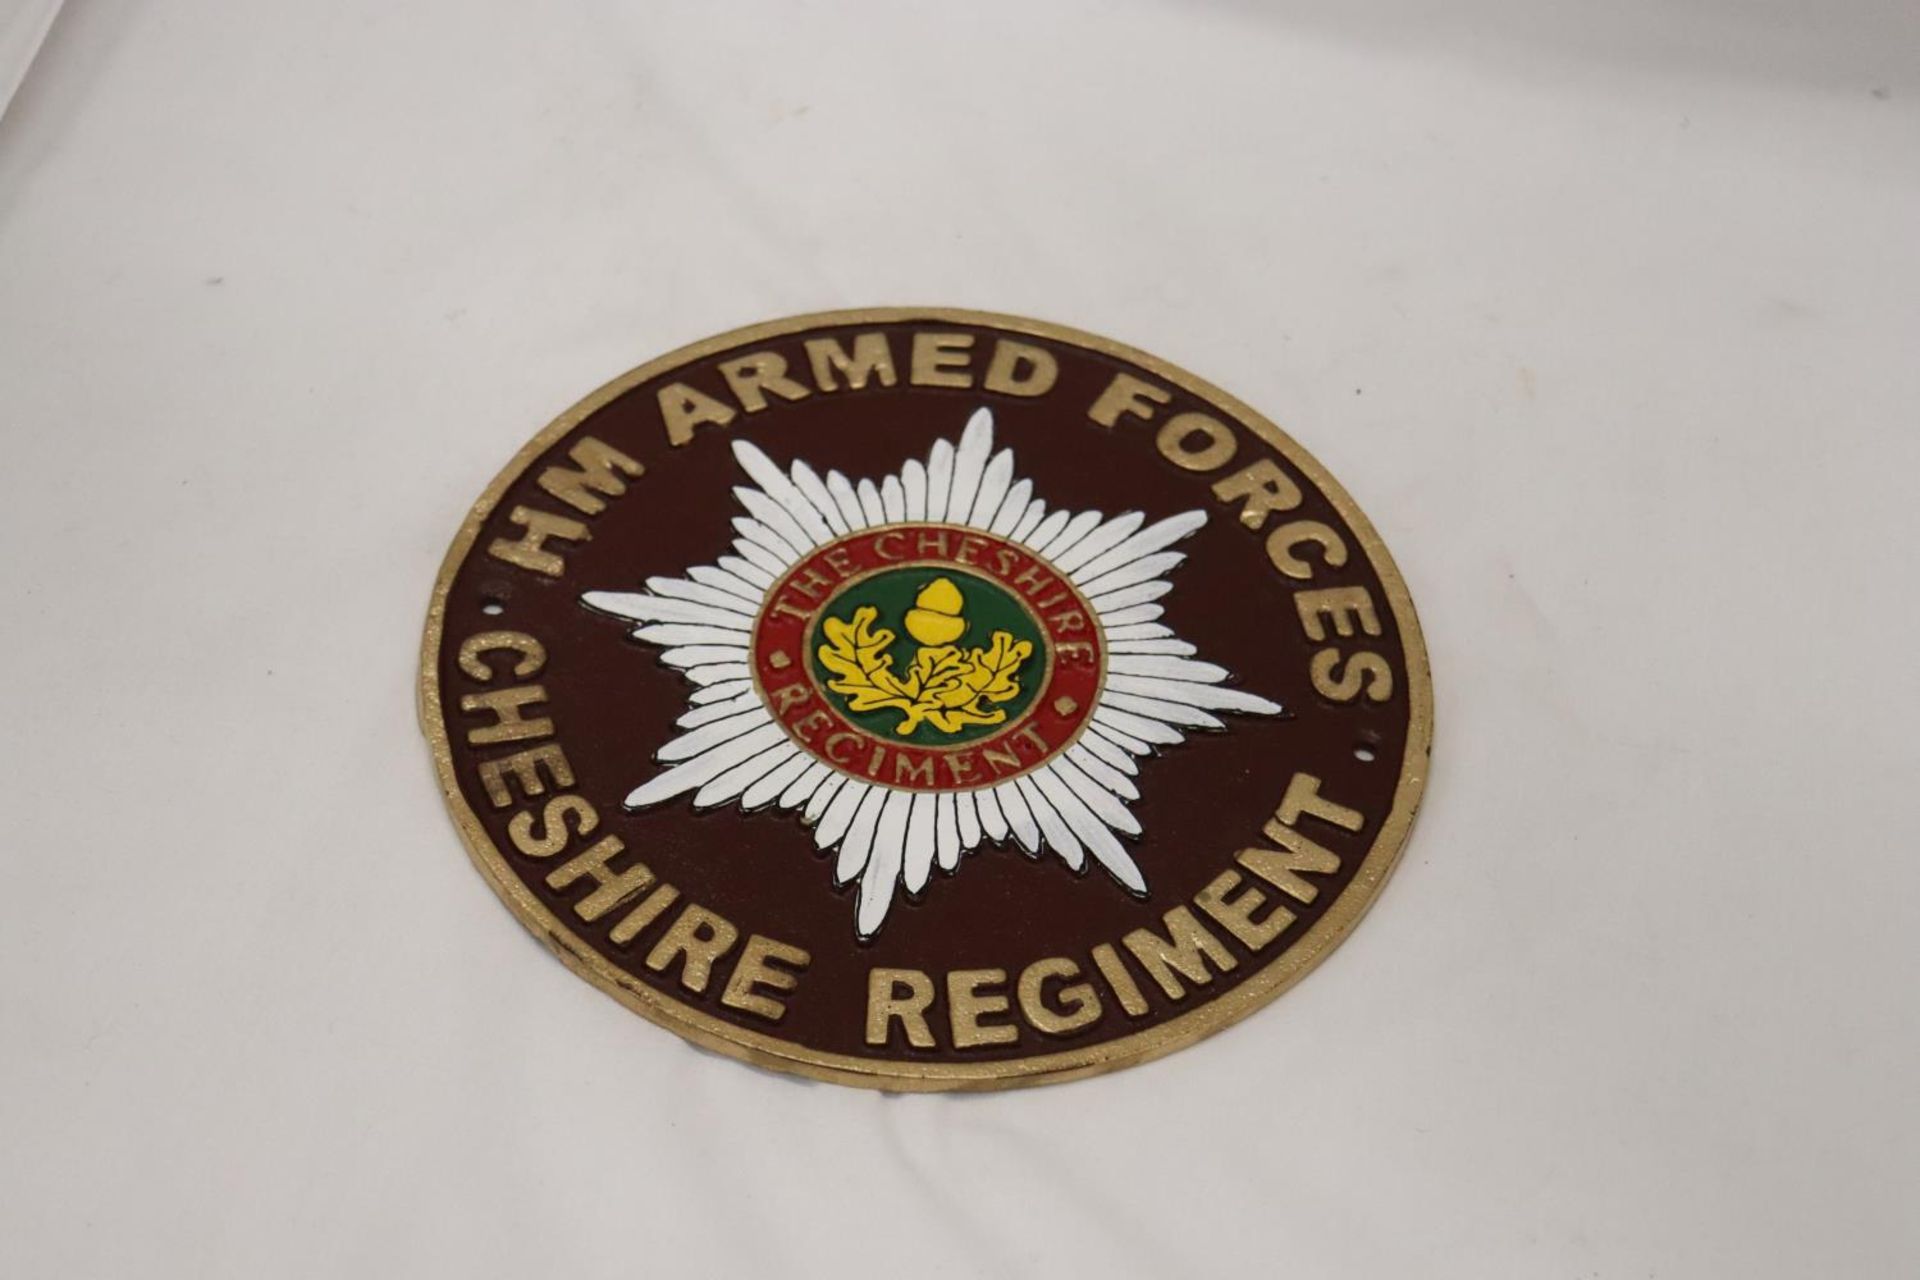 A CAST ARMED FORCES, CHESHIRE SIGN, DIAMETER 23CM